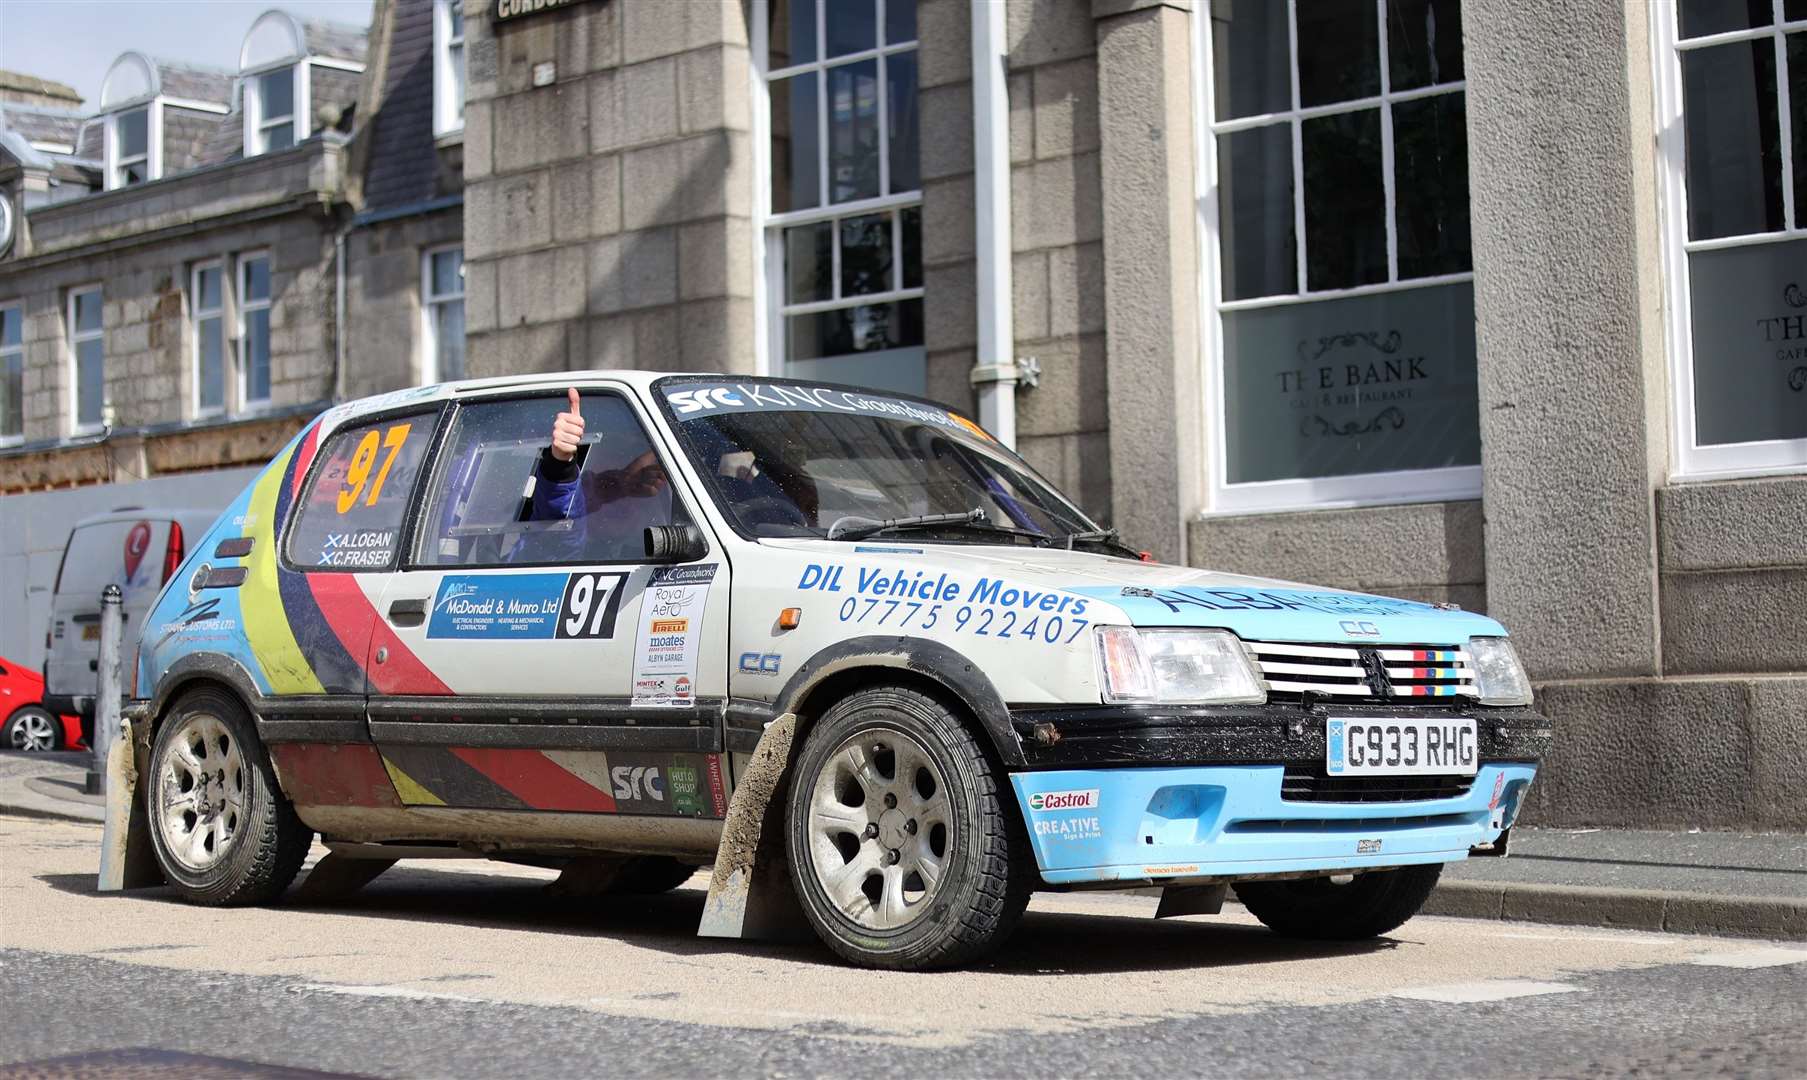 One of the rally cars in Huntly.